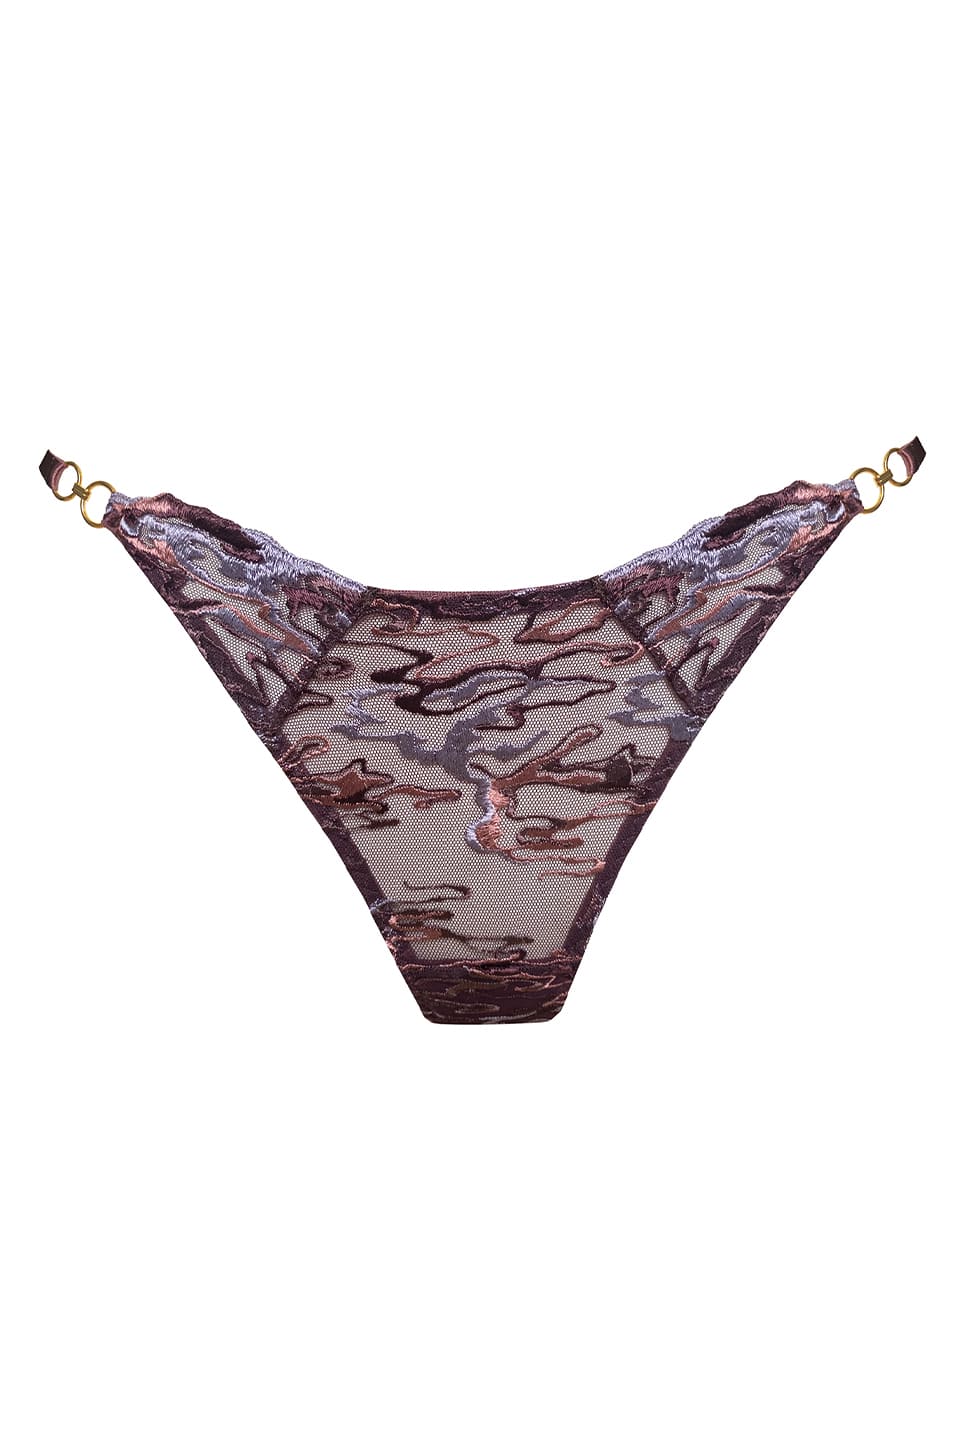 Thumbnail for Product gallery 1, Onda Thong Plum